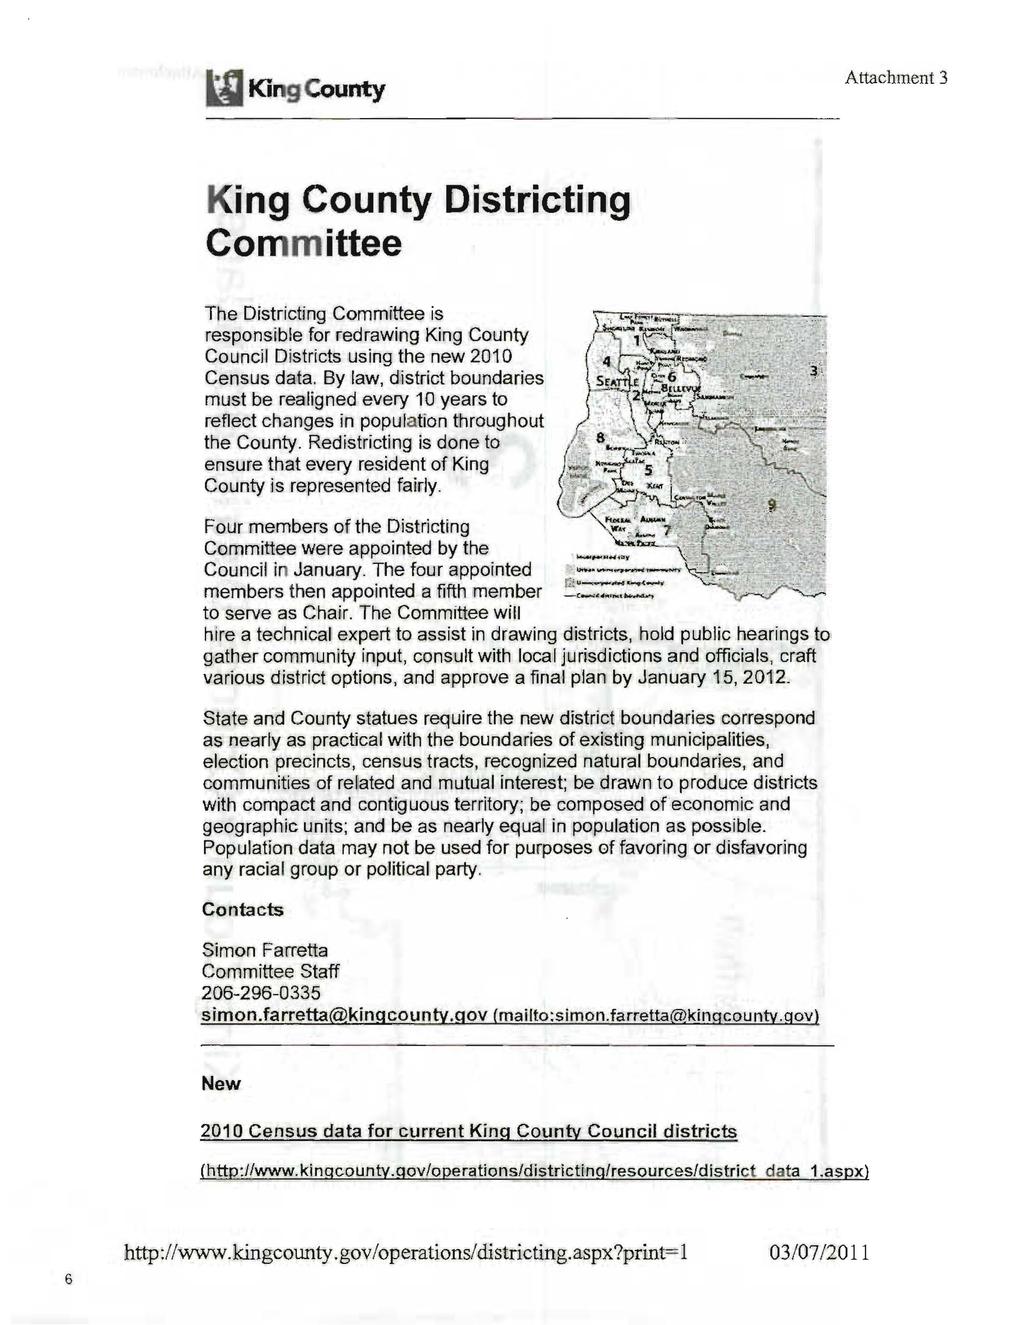 Ki- ounty Attachment 3 in,g County Districti,ng Committee The Districting Committee is responsible for redrawing King County Council Districts using the new 2010 Census data.